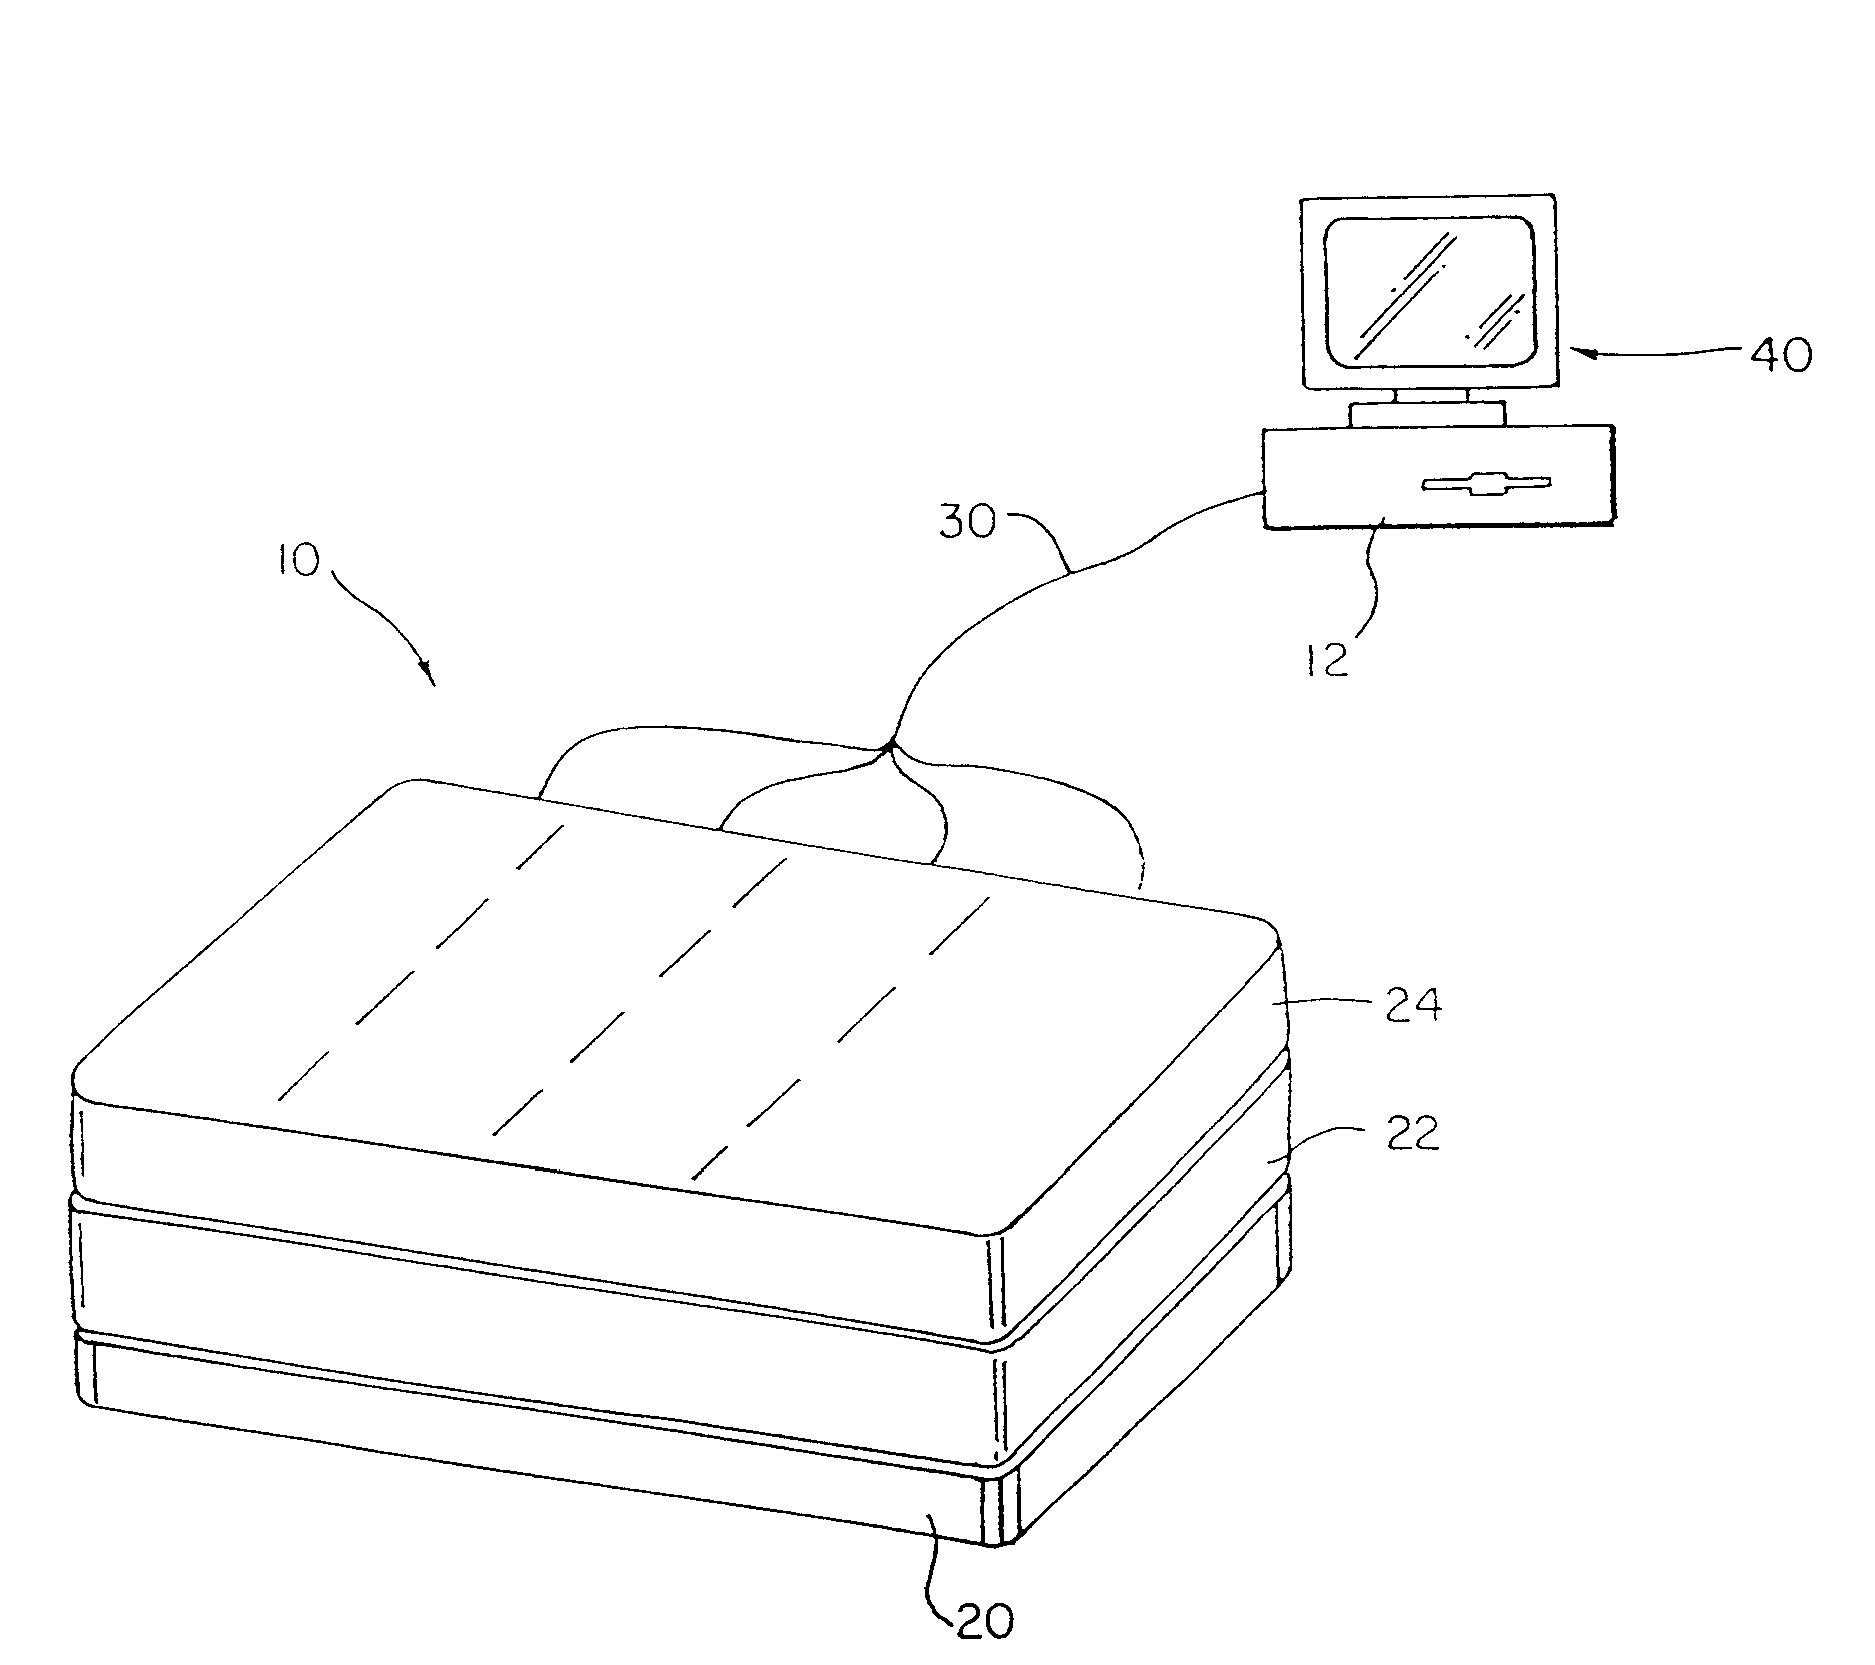 Automatic Mattress Selection System